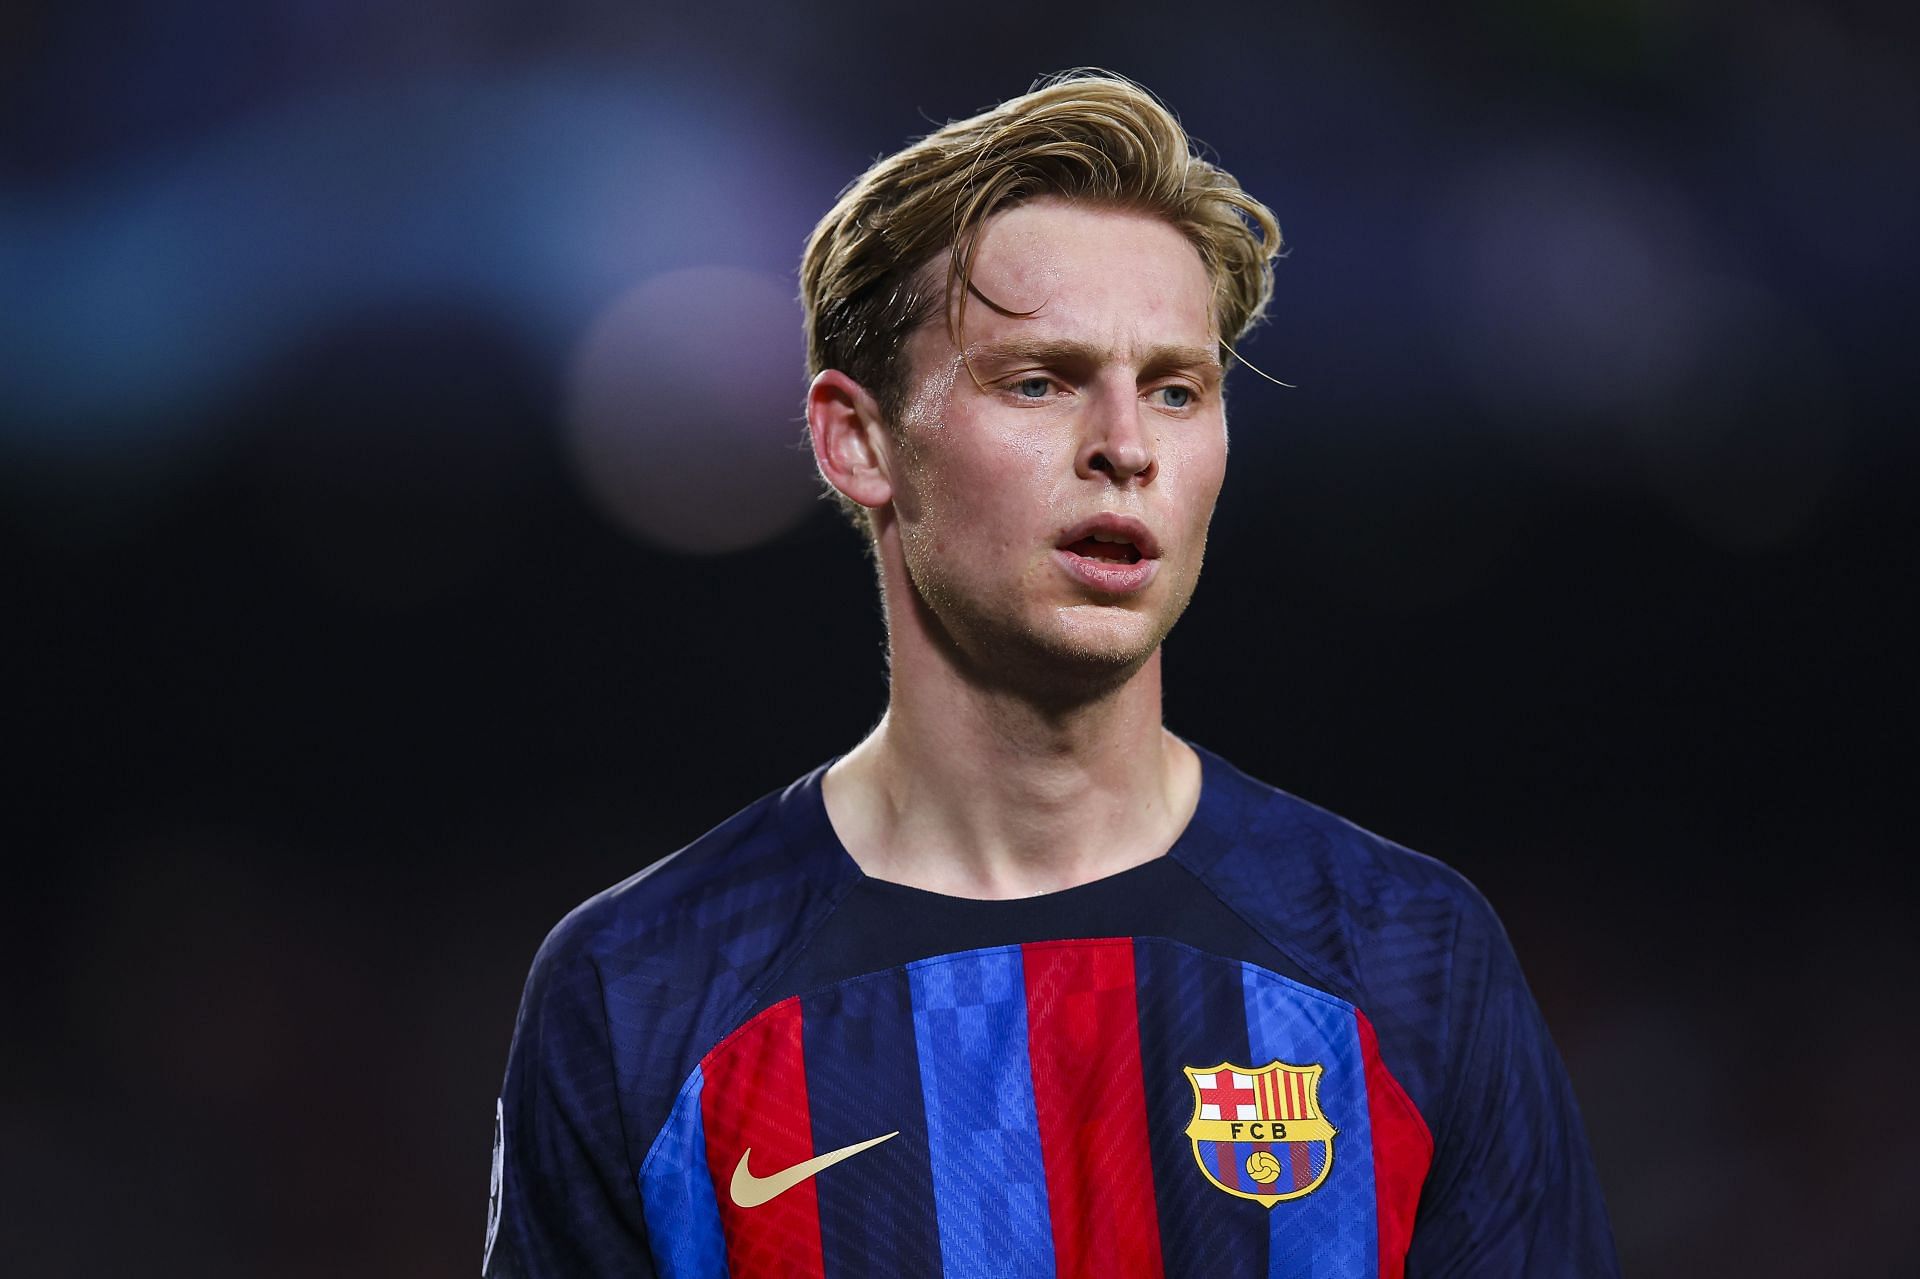 Frenkie de Jong is hoping for a victory on Sunday.